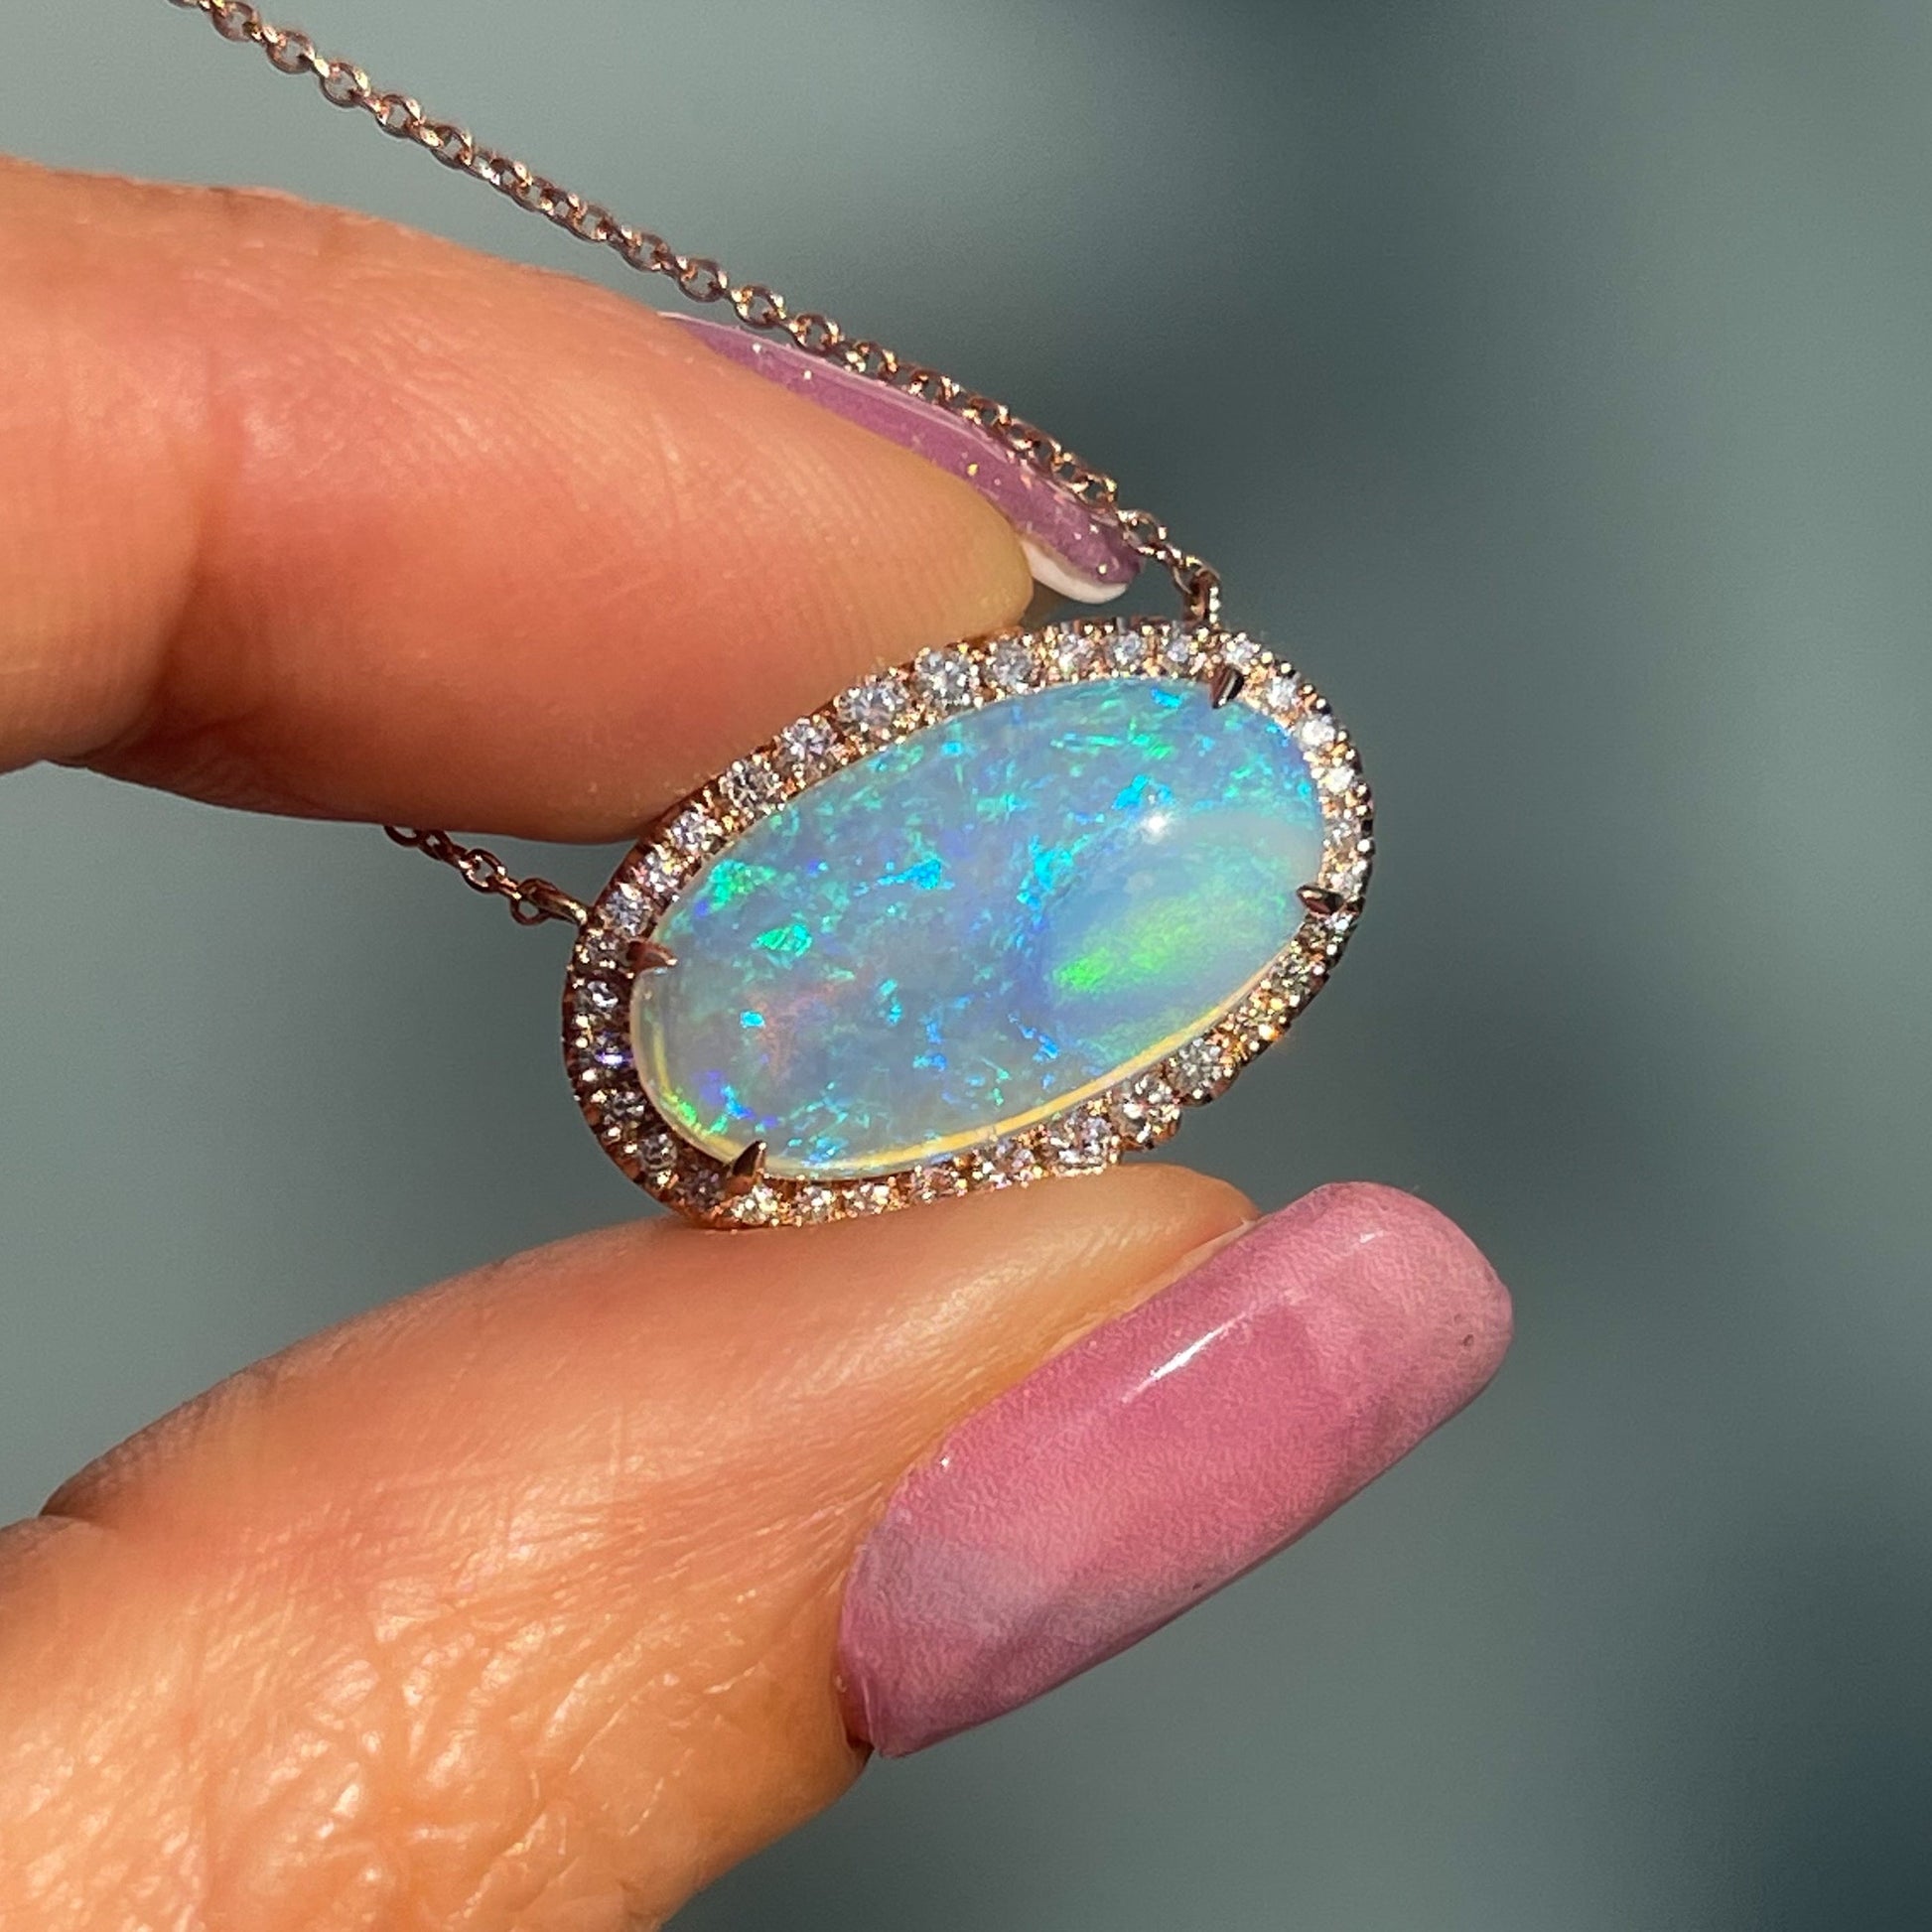 An  Australian Opal Necklace held up in sunlight. Image displays blue and green opal fire and pave diamond halo.